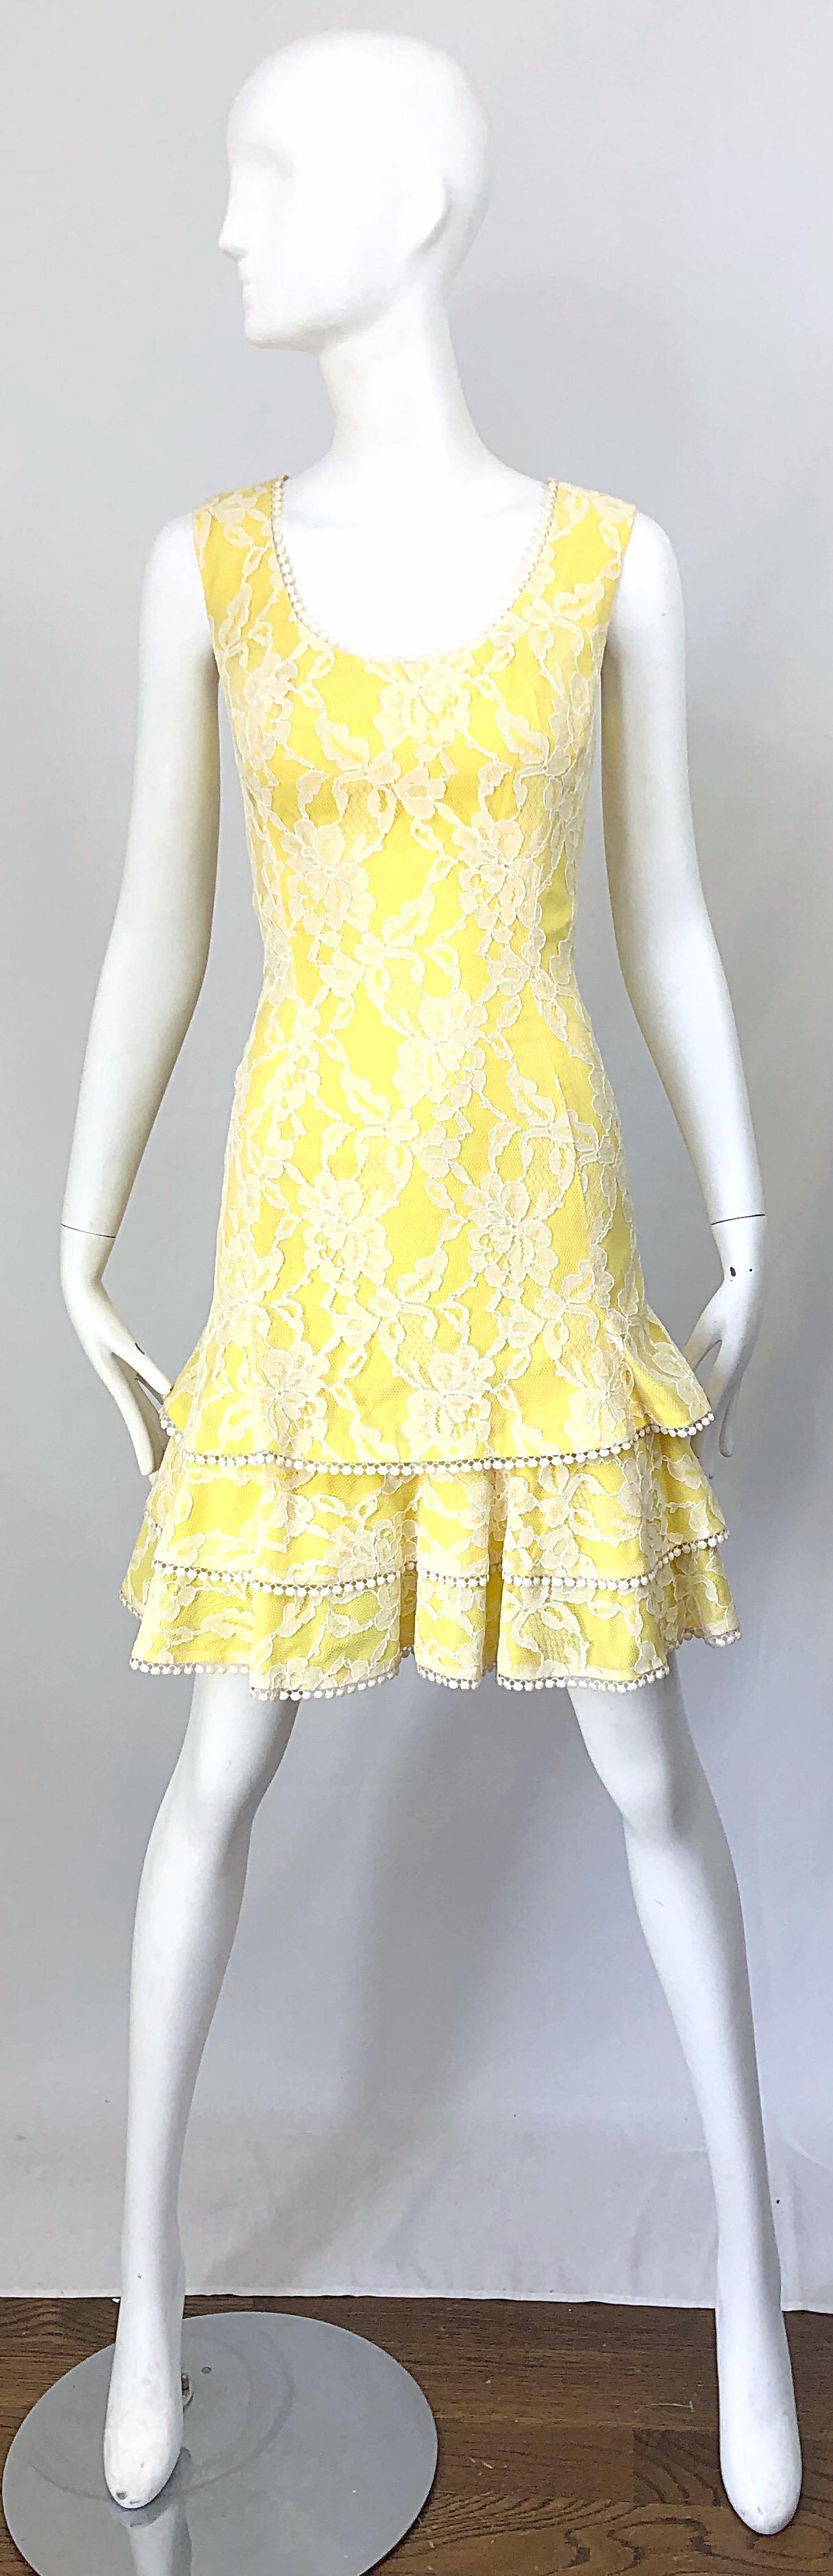 Chic 1960s LILLI DIAMOND canary yellow and white silk lace dress! Features a fitted bodice with a ruffled skirt. White pom poms at the collar and each tier of ruffles. Hidden zipper up the back with hook-and-eye closure. Great for any day or evening